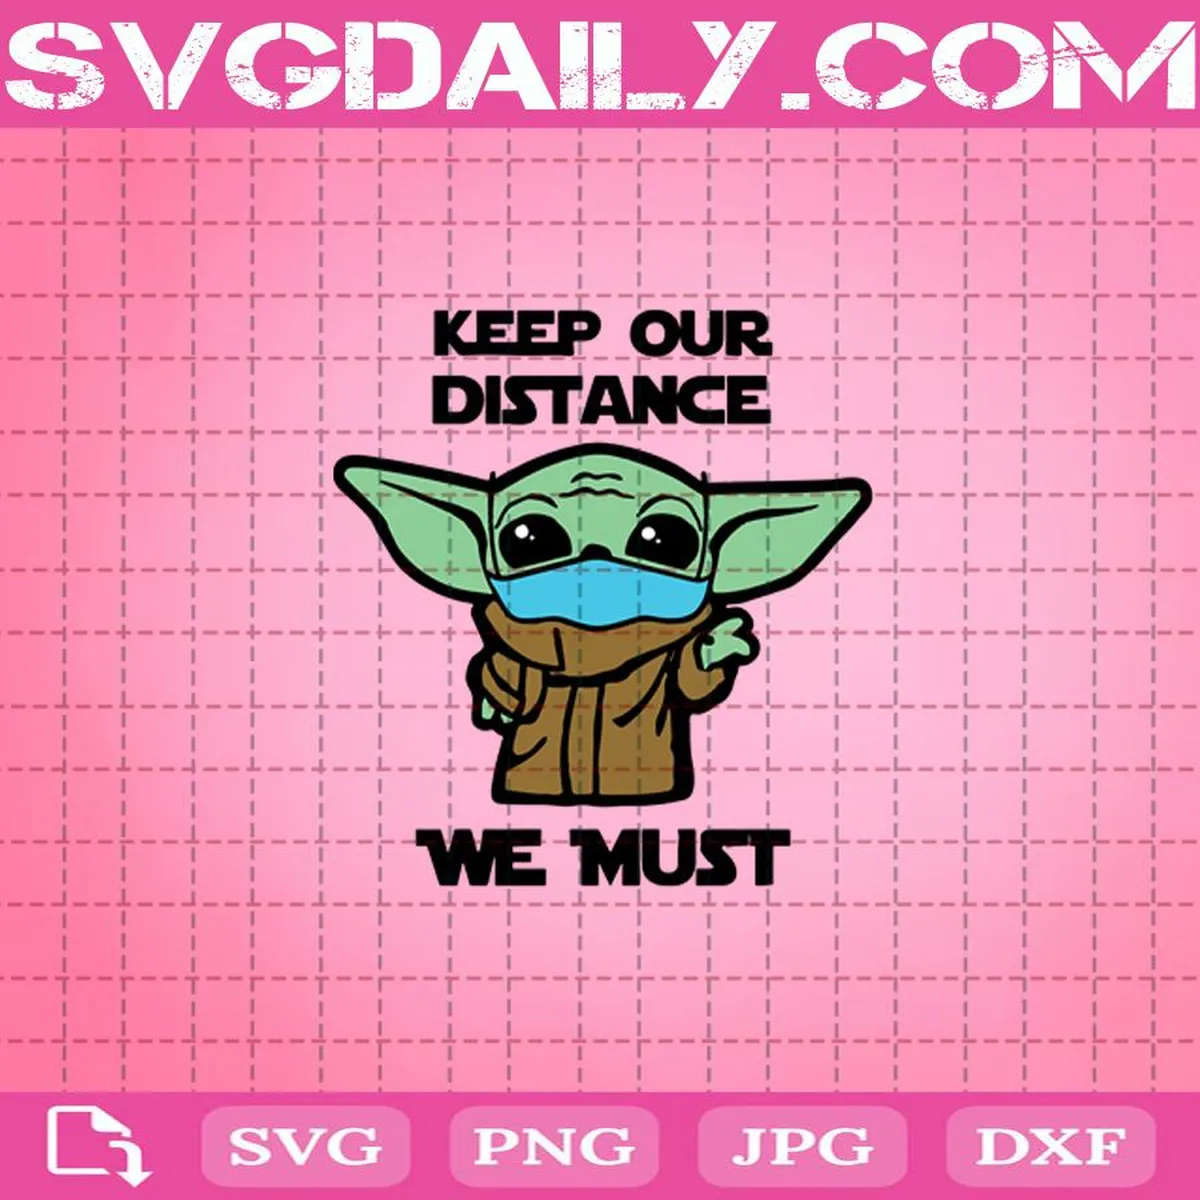 Keep Our Distance We Must Svg, Baby Yoda With Mask Svg, Star Wars Svg, Quarantine Svg, Baby Yoda Svg